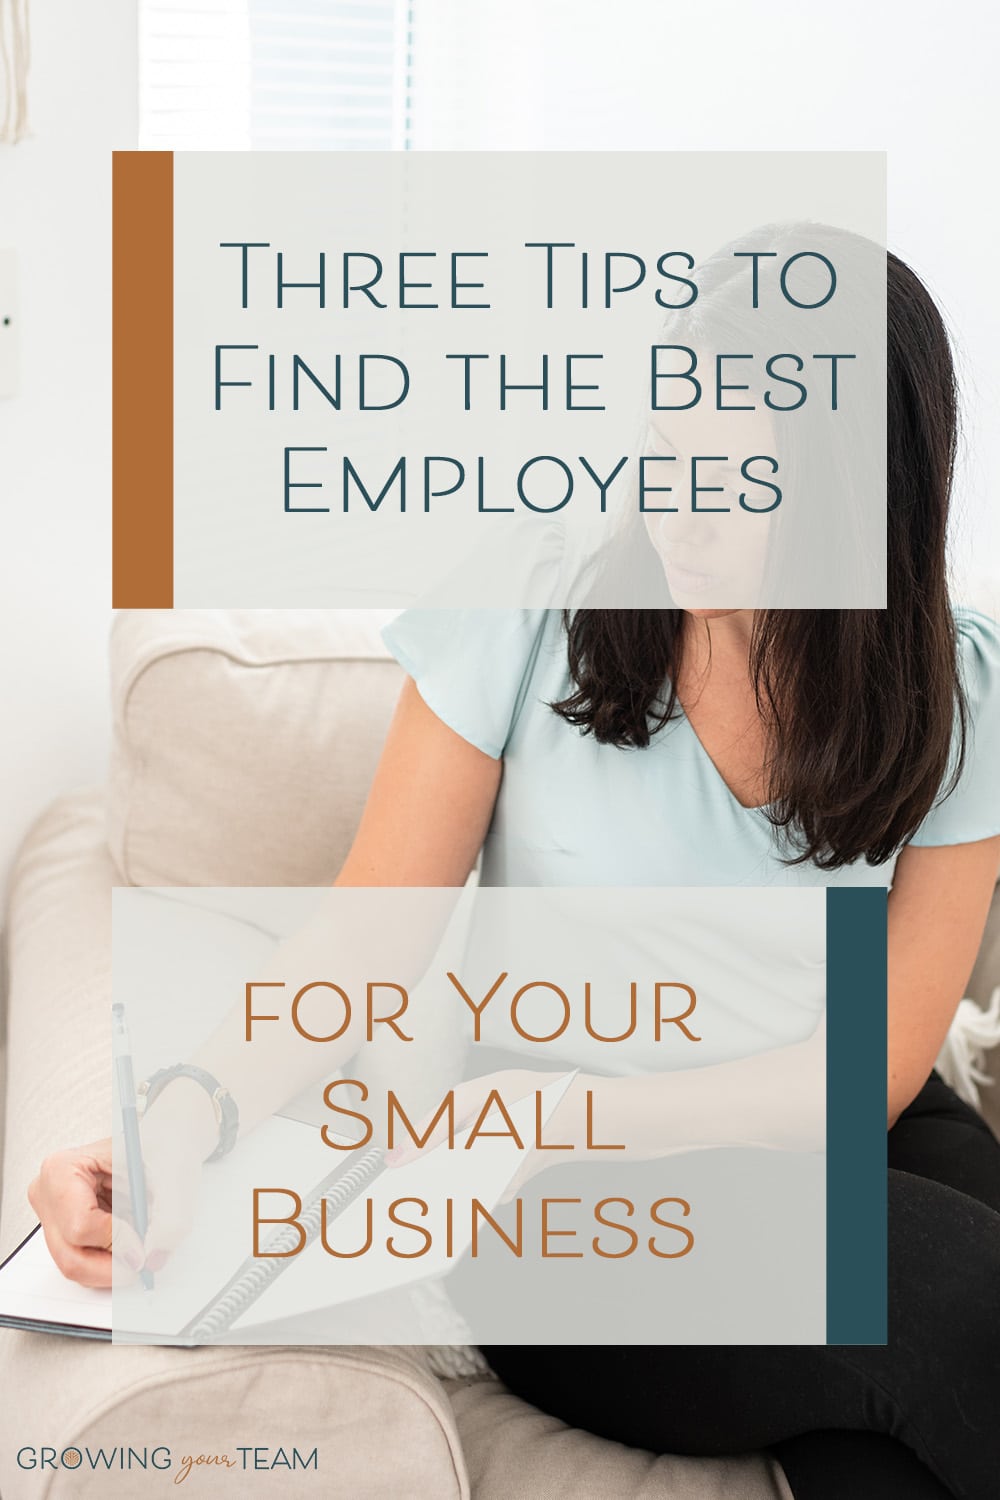 Three Tips to Find the Best Employees for Your Small Business, Growing Your Team, Jamie Van Cuyk, Small Business hiring consulting